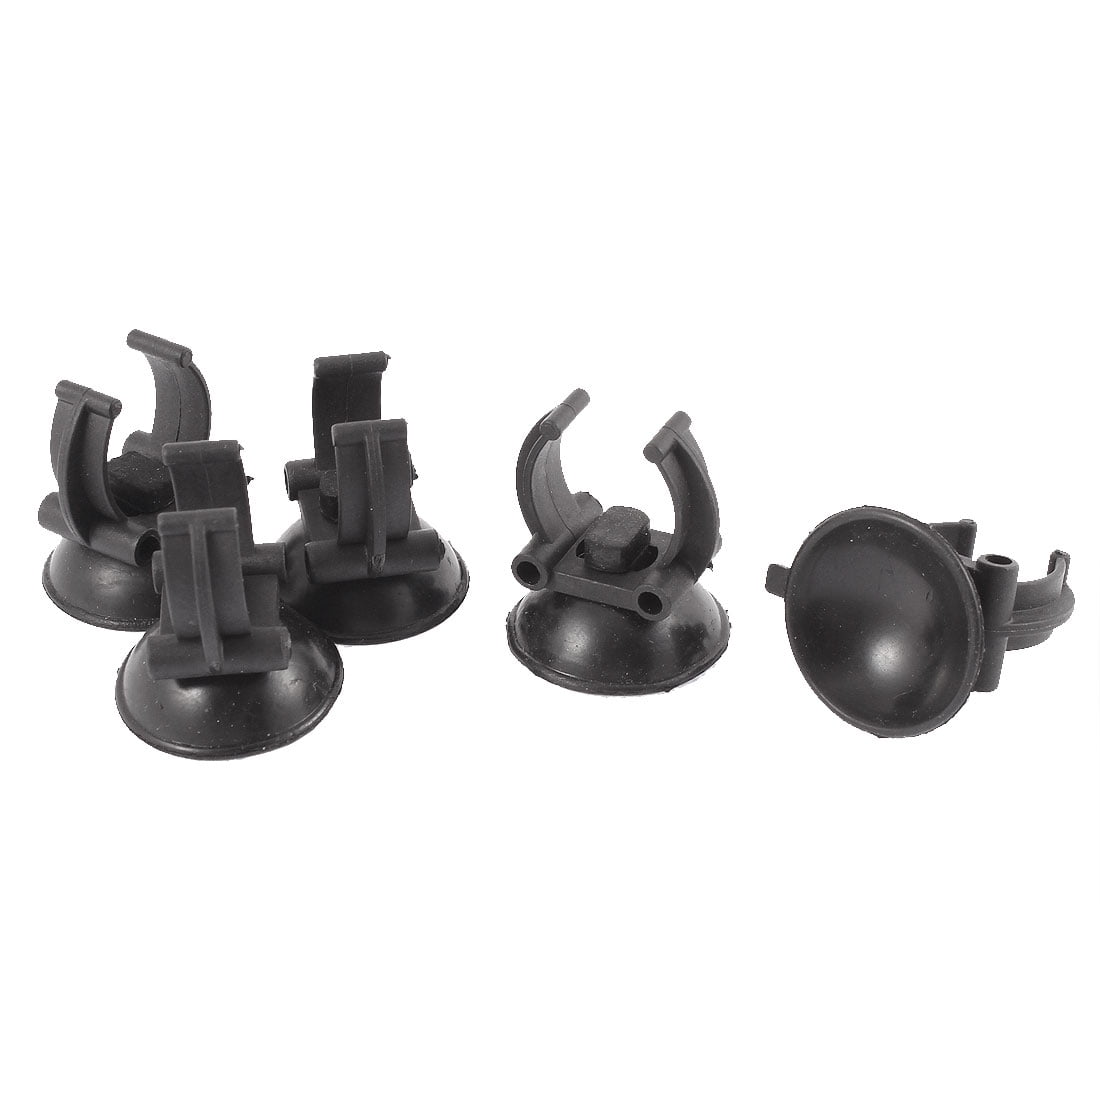 Aquarium Fish Tank Suction Cup Air Tube Holders Clips Clamps Black